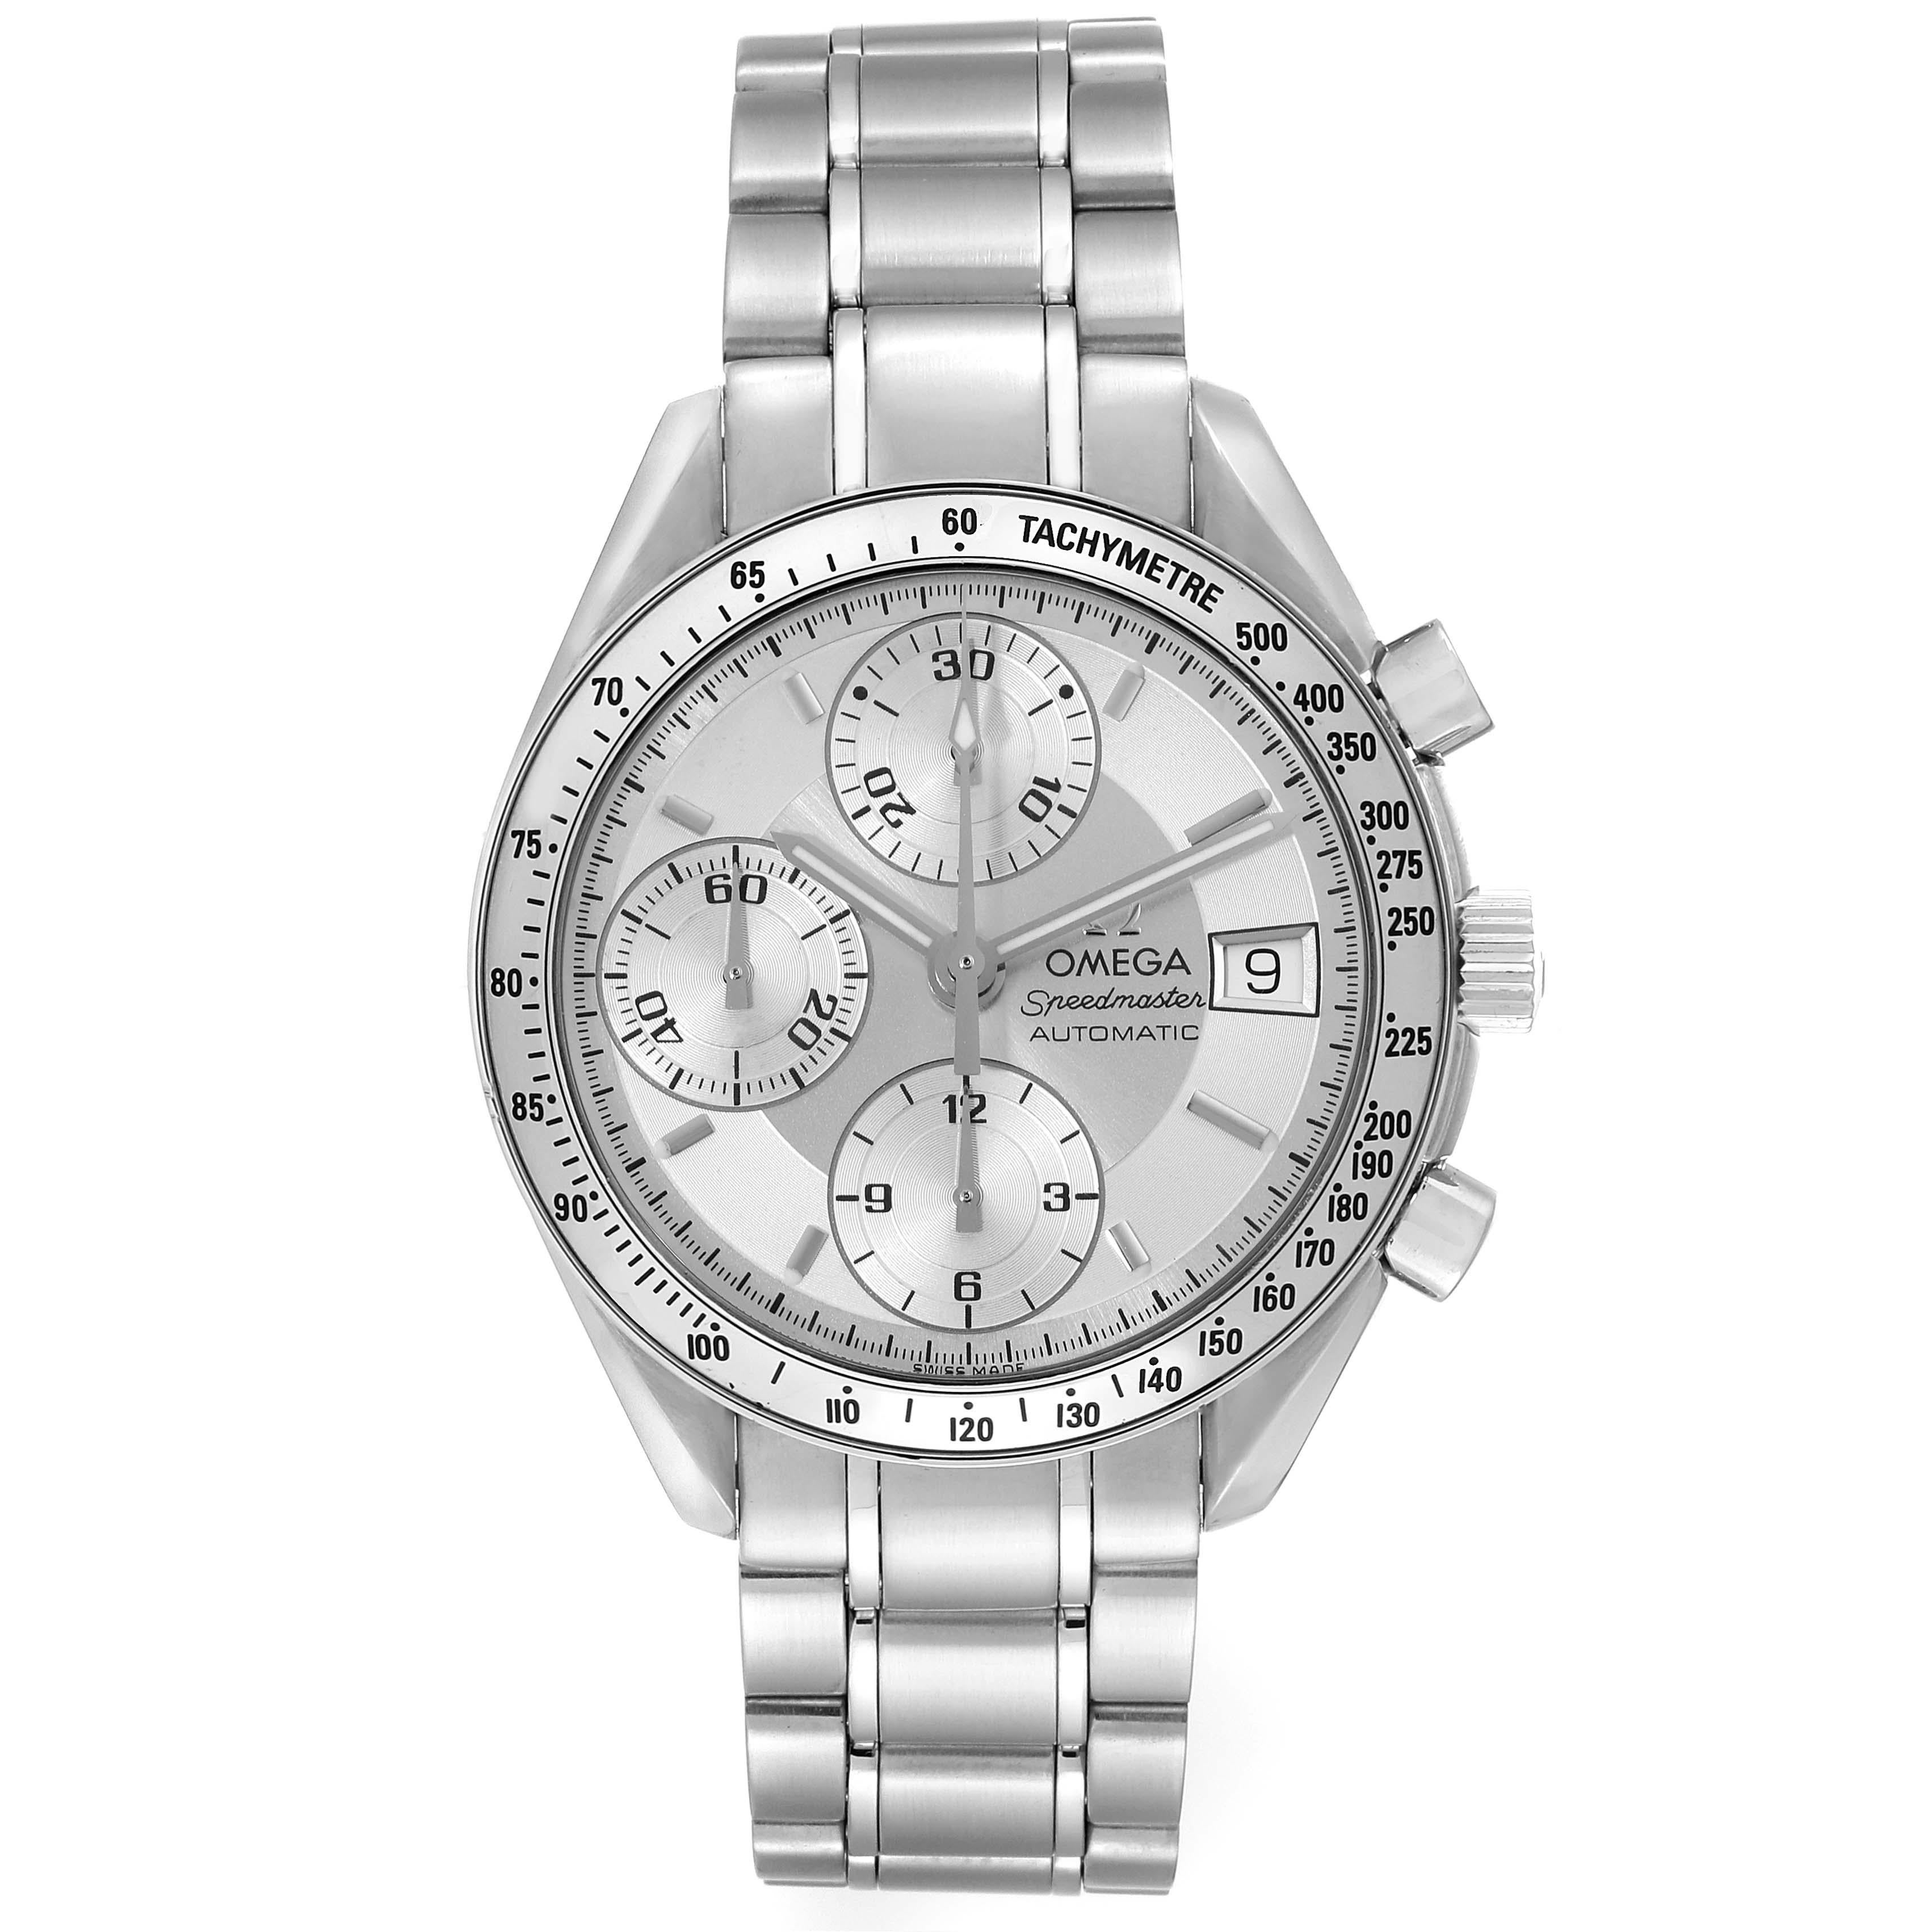 Omega Speedmaster Date Silver Dial Automatic Steel Mens Watch 3513.30.00 Card. Automatic self-winding chronograph movement. Stainless steel round case 39 mm in diameter. Polished stainless steel bezel with tachymeter function. Scratch-resistant